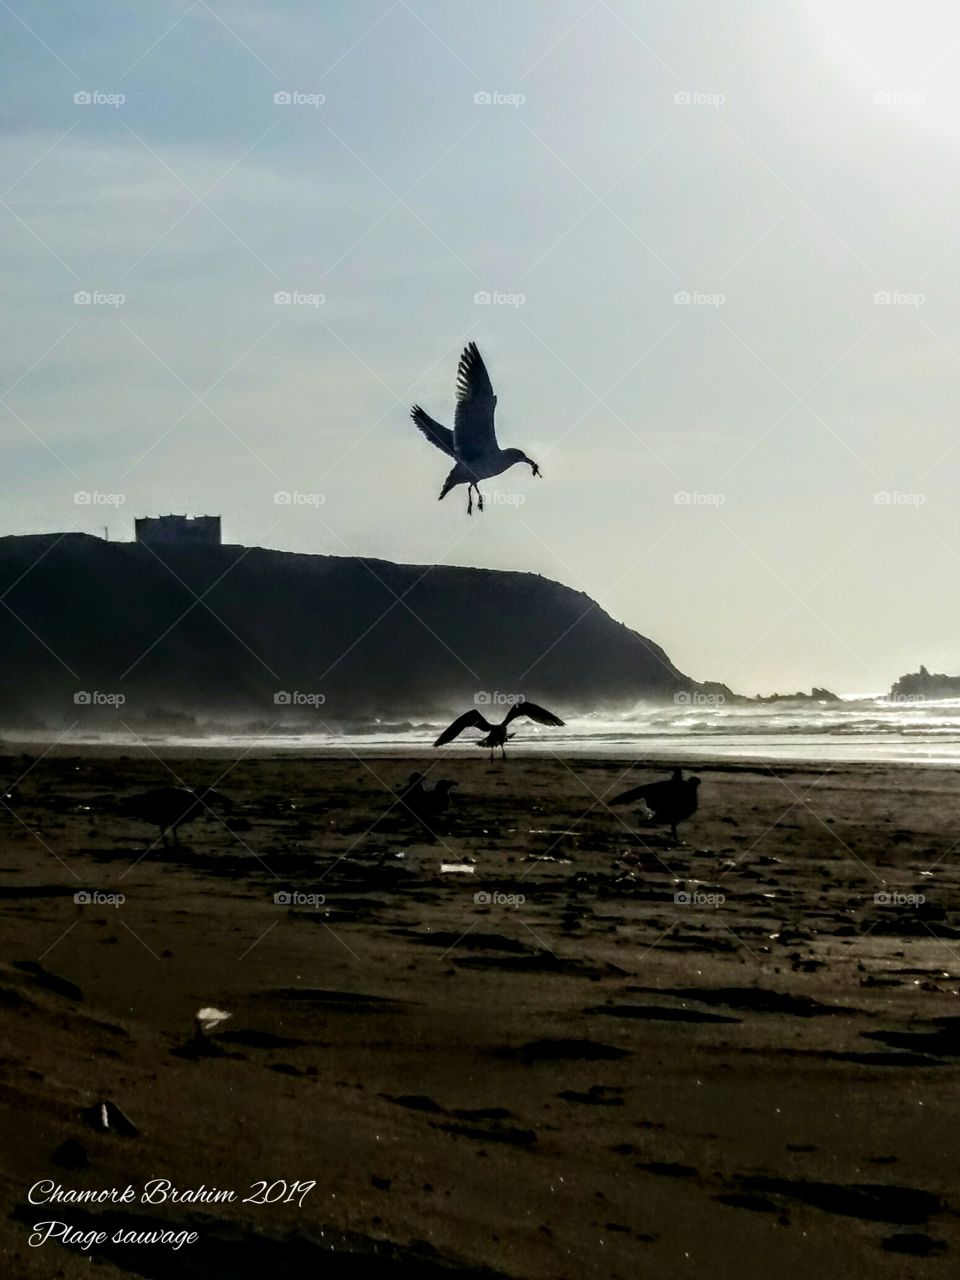 I took this photo in a wild beach (plage sauvage)in the region of Ifni.There were many bird gulls .They were flying near us .So I took many photos of them ,but this one is soooo amazing .It was a great moment to capture such beautiful creatures.